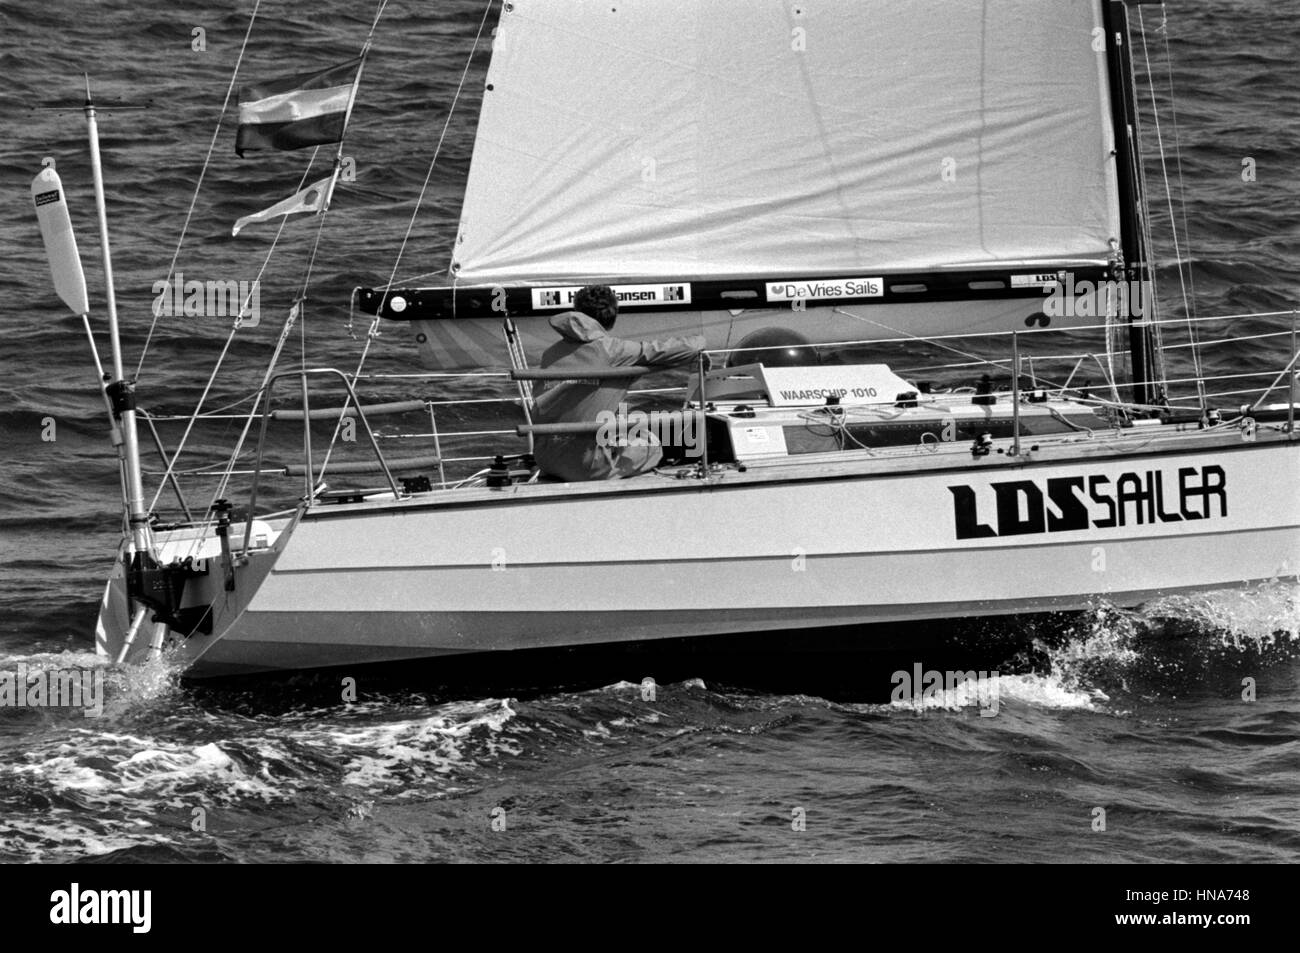 AJAXNETPHOTO. 2 JUNE,1984.PLYMOUTH, ENGLAND. -OSTAR RACE-  LDS SAILER SKIPPERED BY HENK JUKKEMA (NED) PLACED 38TH OVERALL. PHOTO:AJAX NEWS PHOTOS  REF:840206 28 Stock Photo